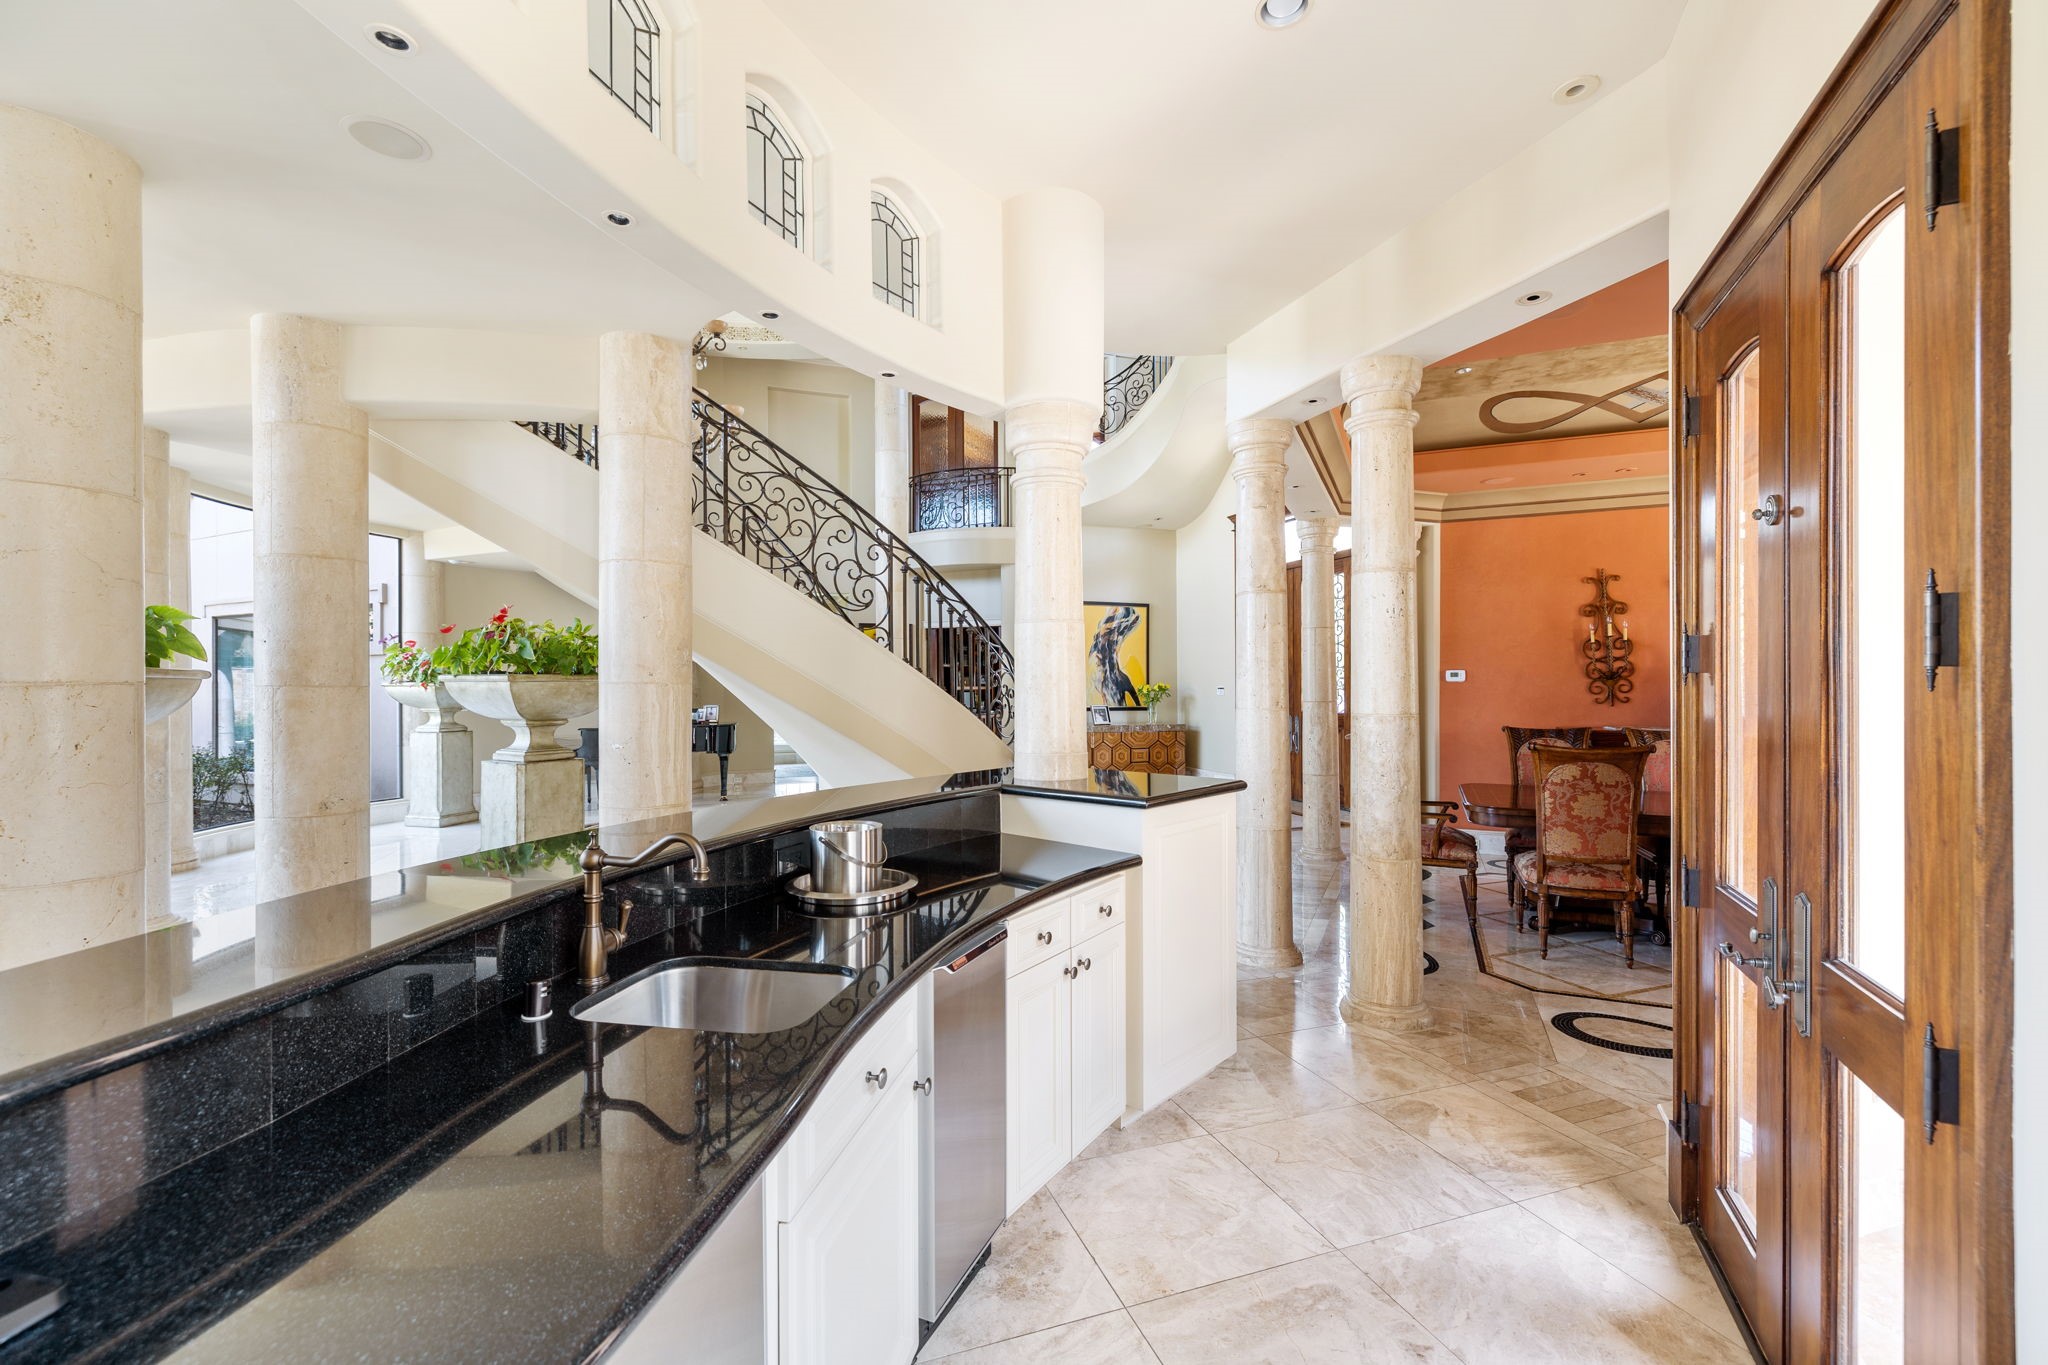 Off another axis of the Grand Entry is a Wet Bar between the Living Room and the Dining Room.  Above are more leaded glass clerestory window, while the Bar itself is topped with granite countertops, equipped with an Scotsman ice machine and Subzero beverage refrigerator.